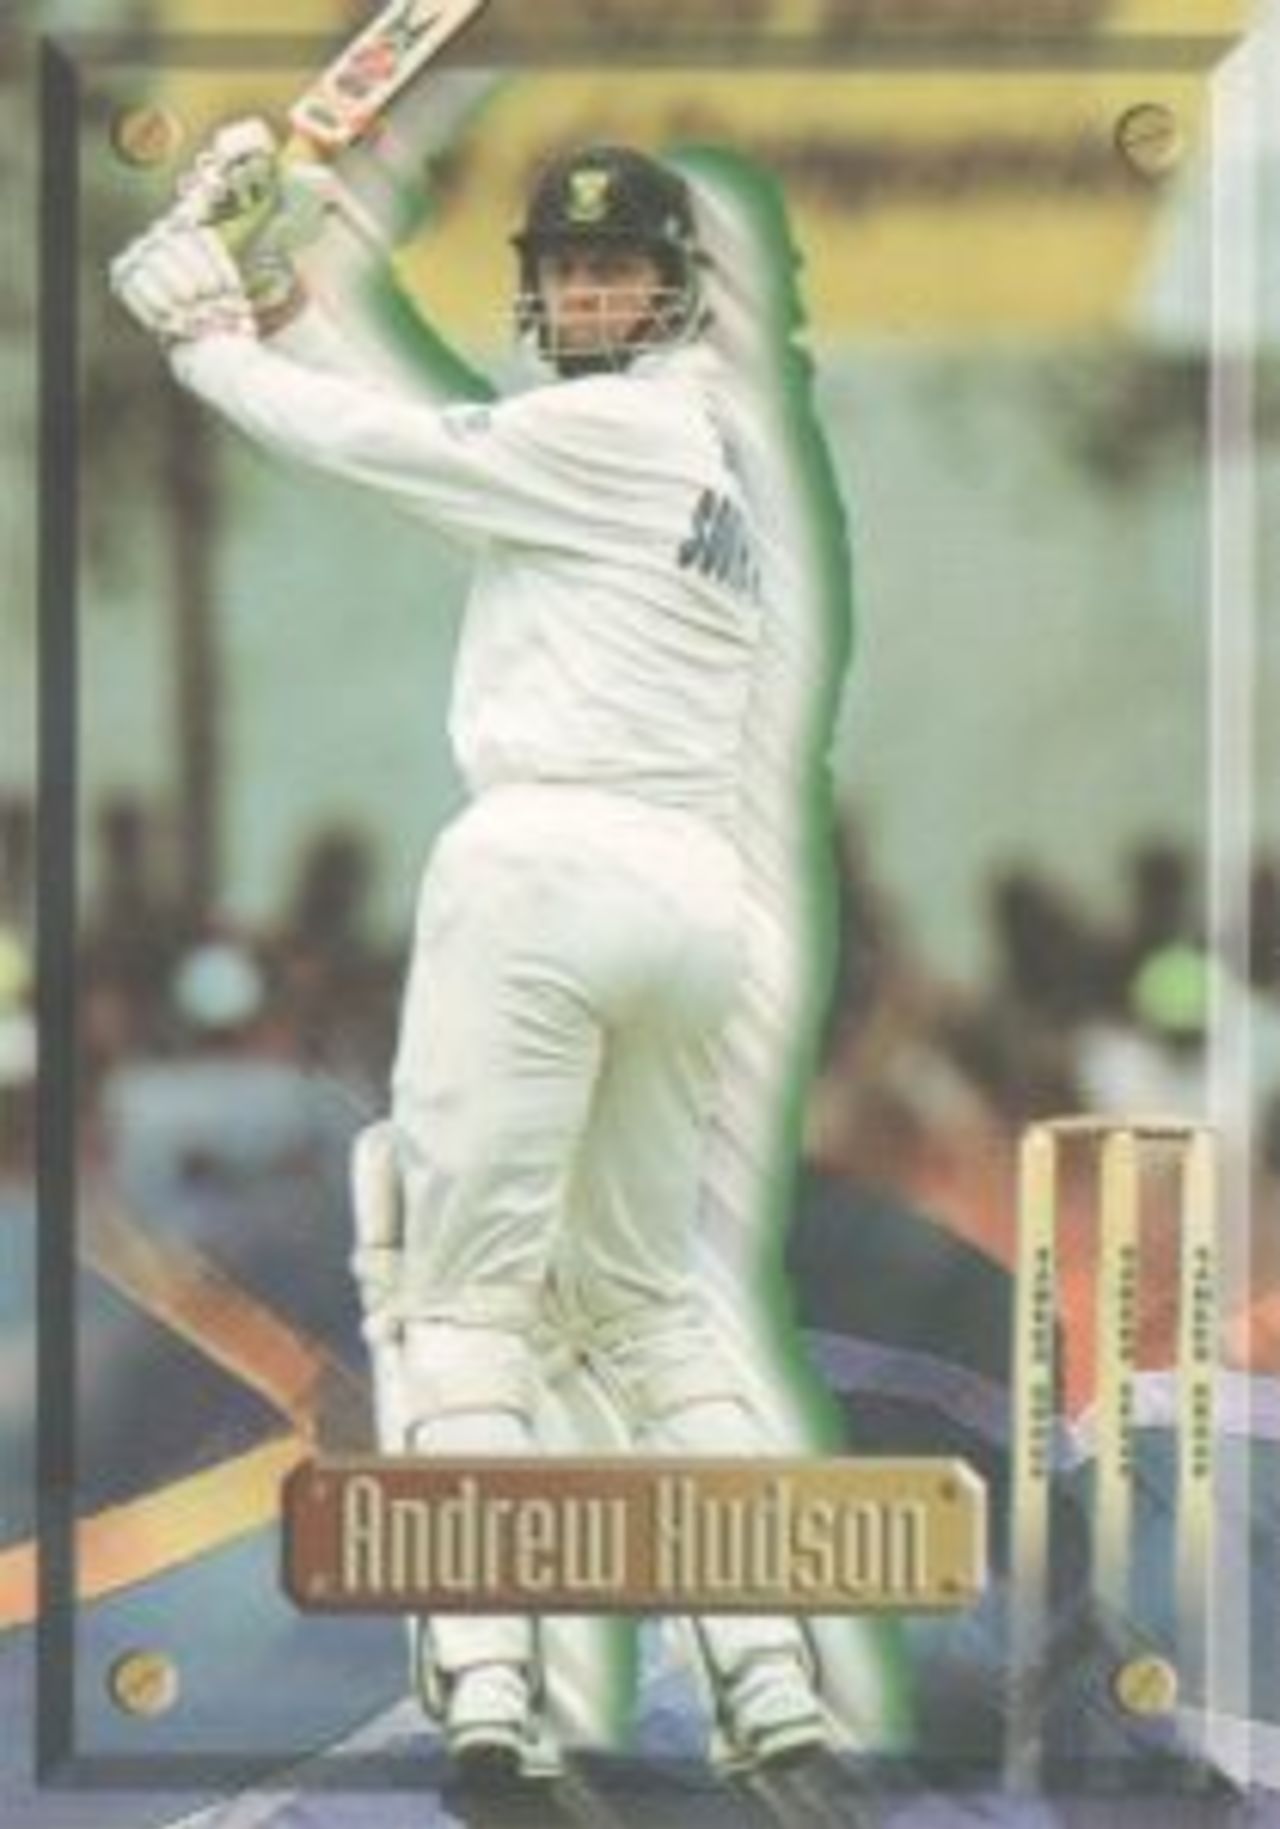 Trade card: Top deck Andrew Hudson